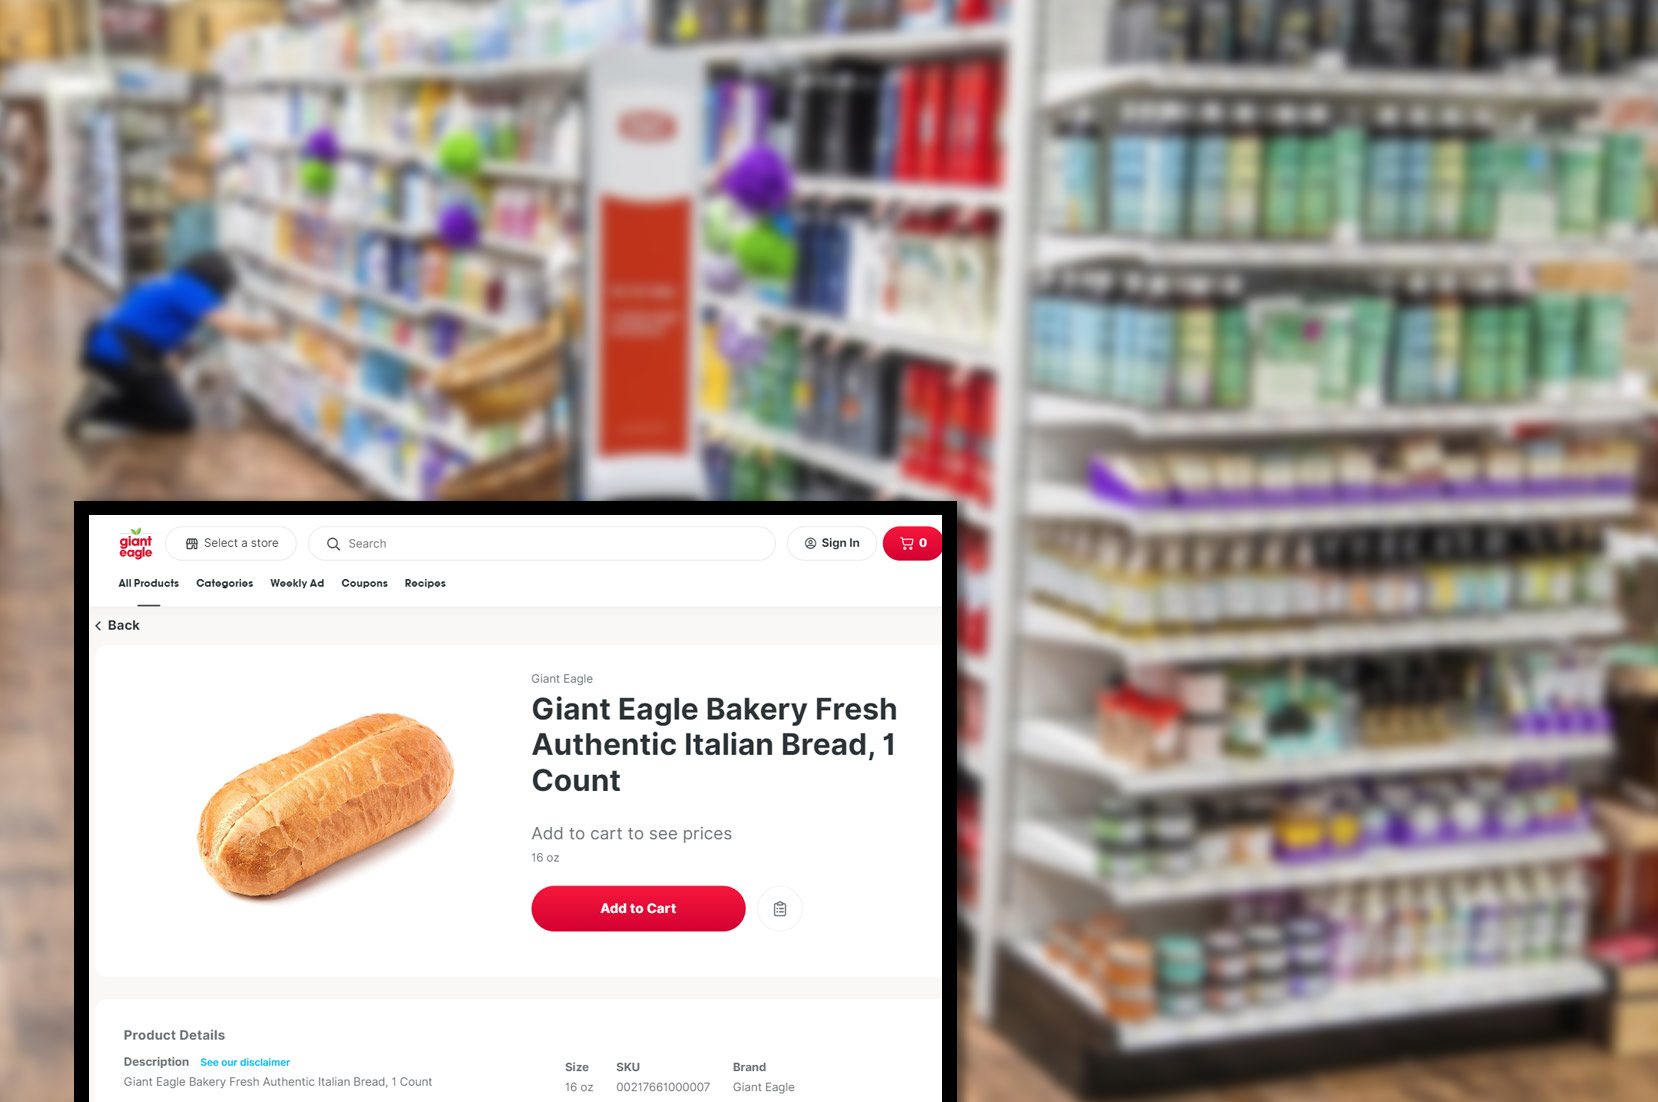 gianteagle-comproduct-pricing-information-and-image-scraping-services